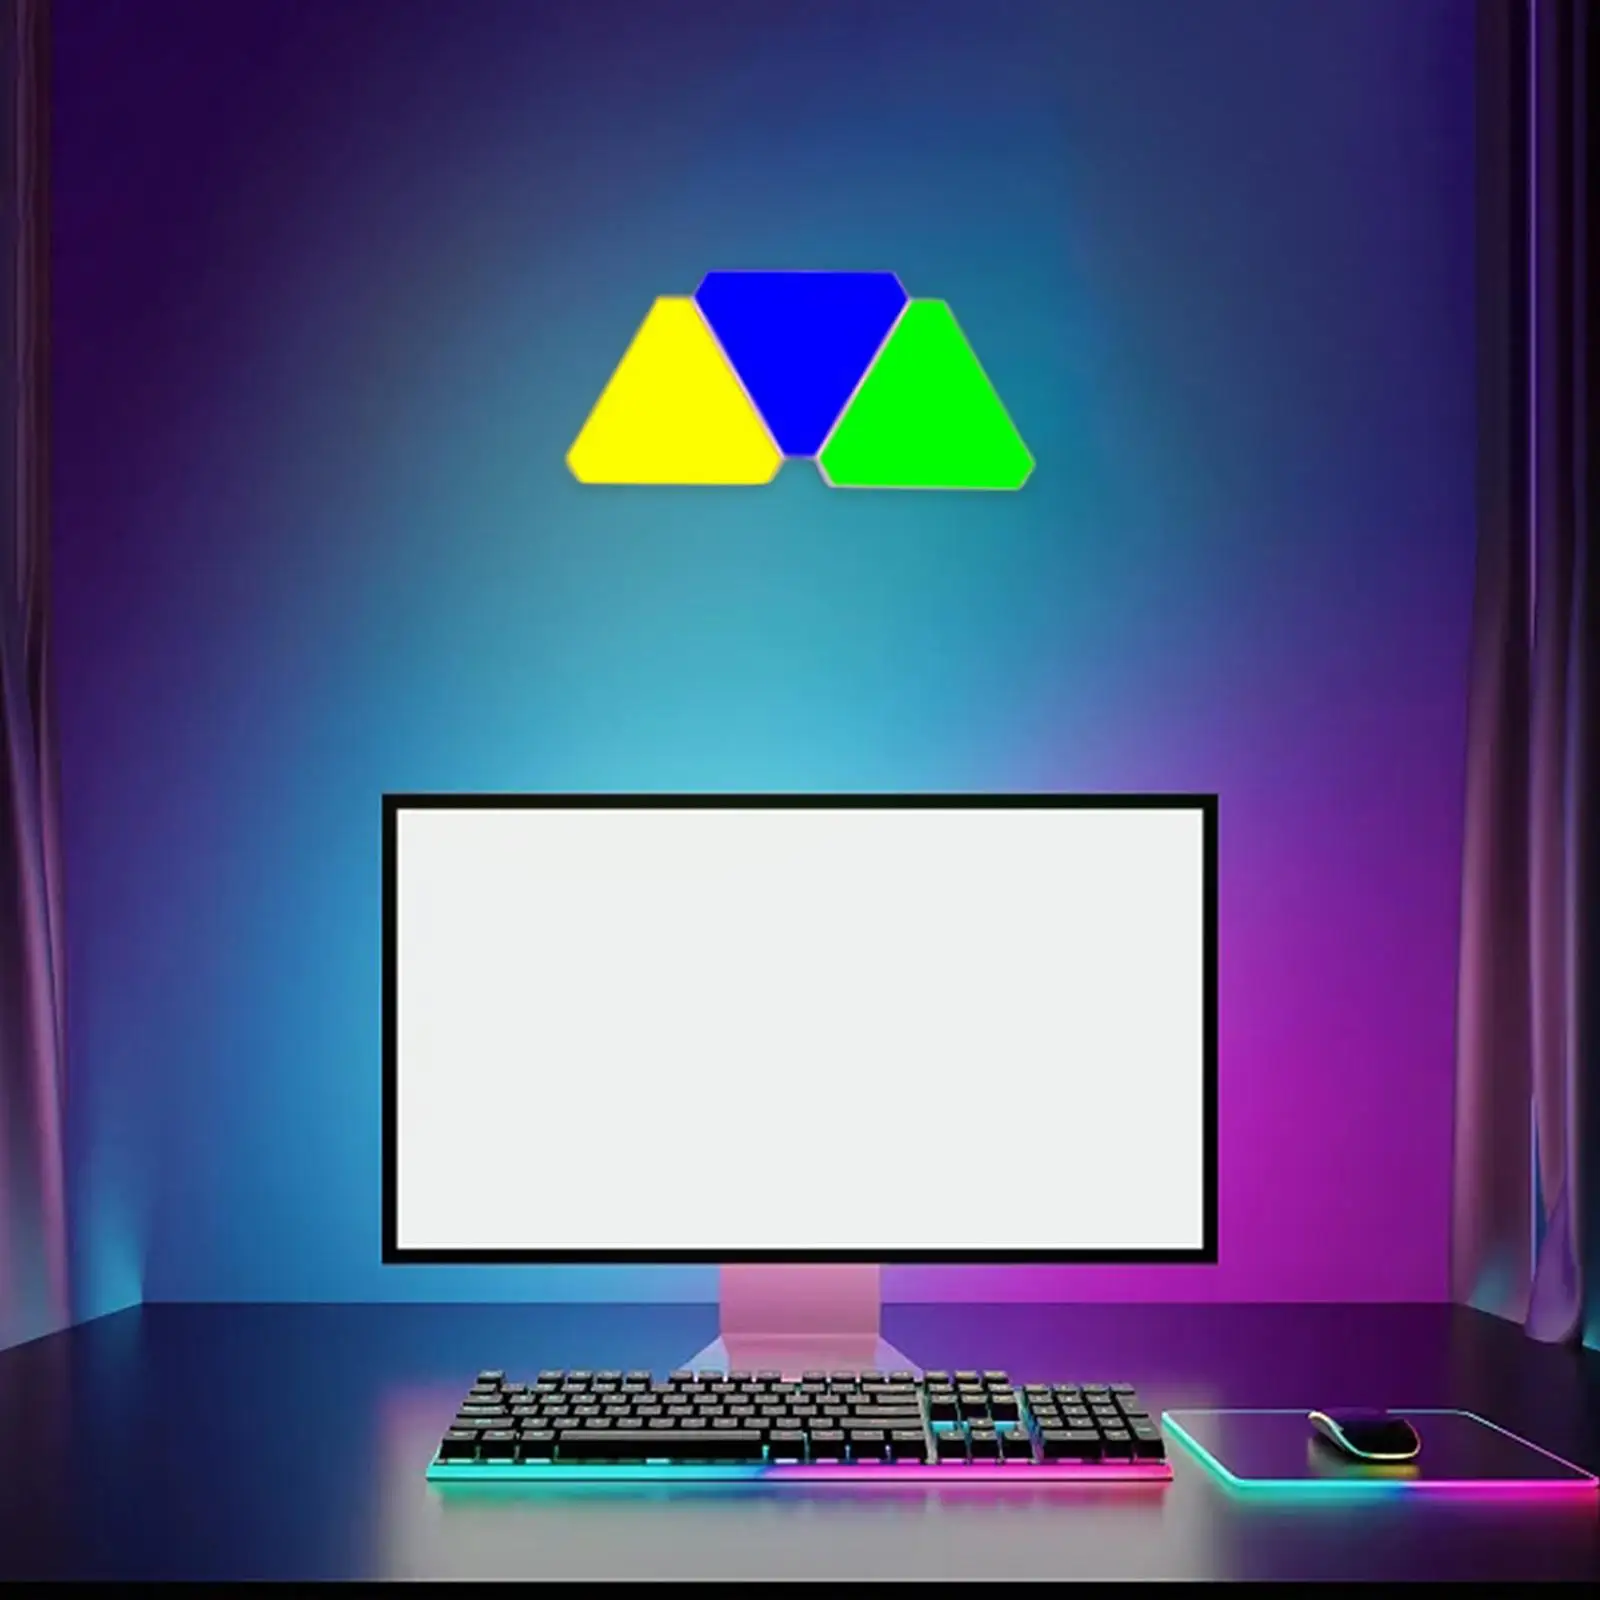 LED Light Panels Smart App Control with Controller Multicolor Effects Triangle Lights for Party Wedding Bar Gaming Room Office